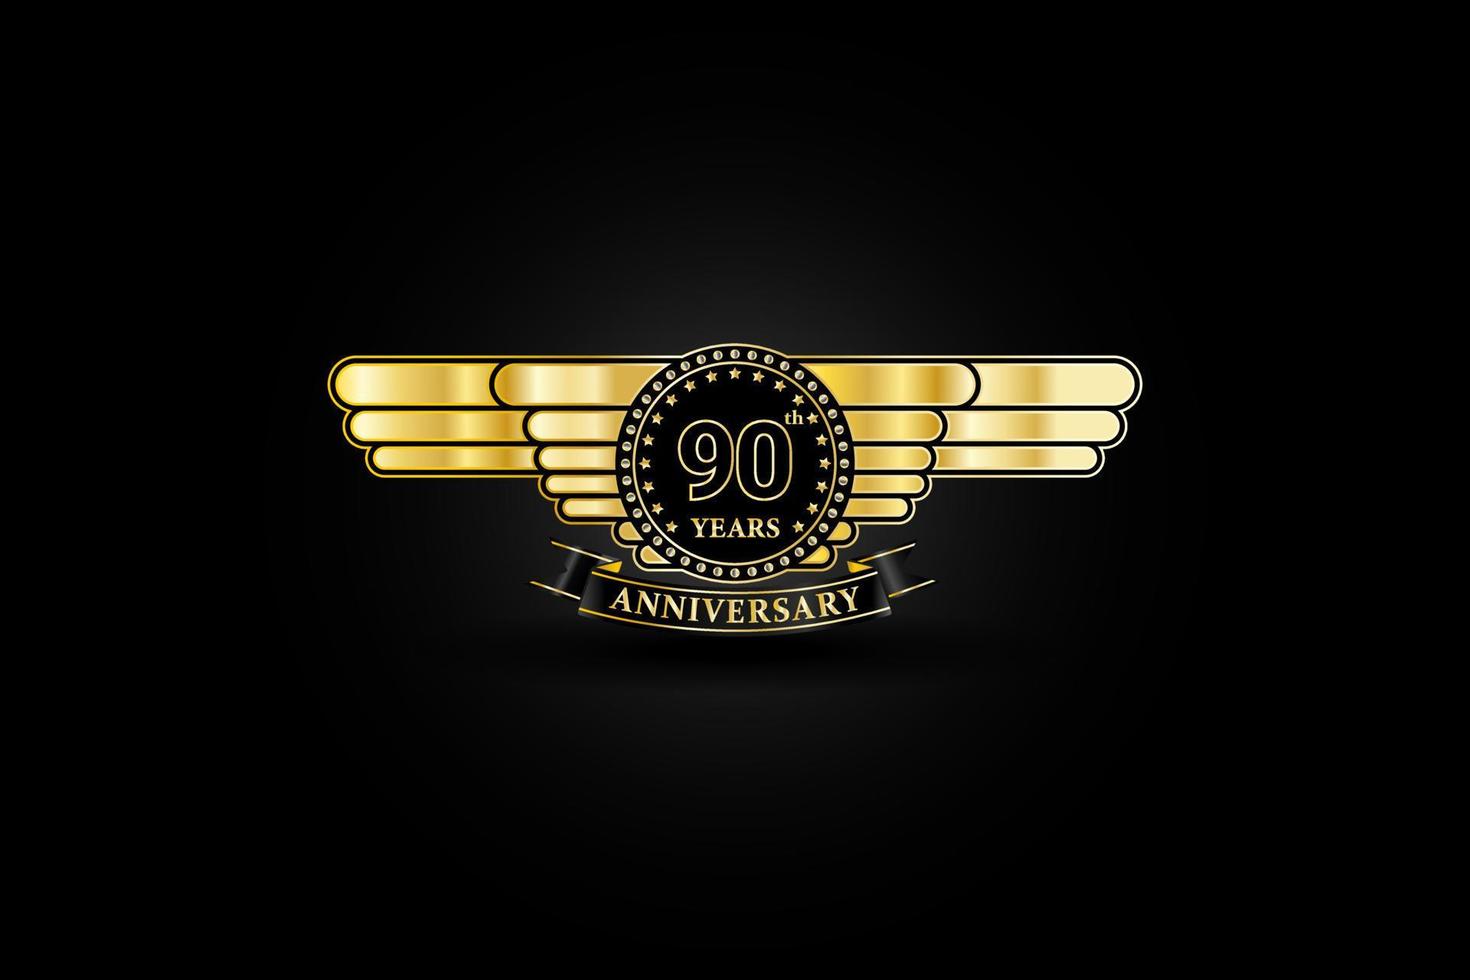 90th anniversary golden gold logo with gold wing and ribbon isolated on black background, vector design for celebration.